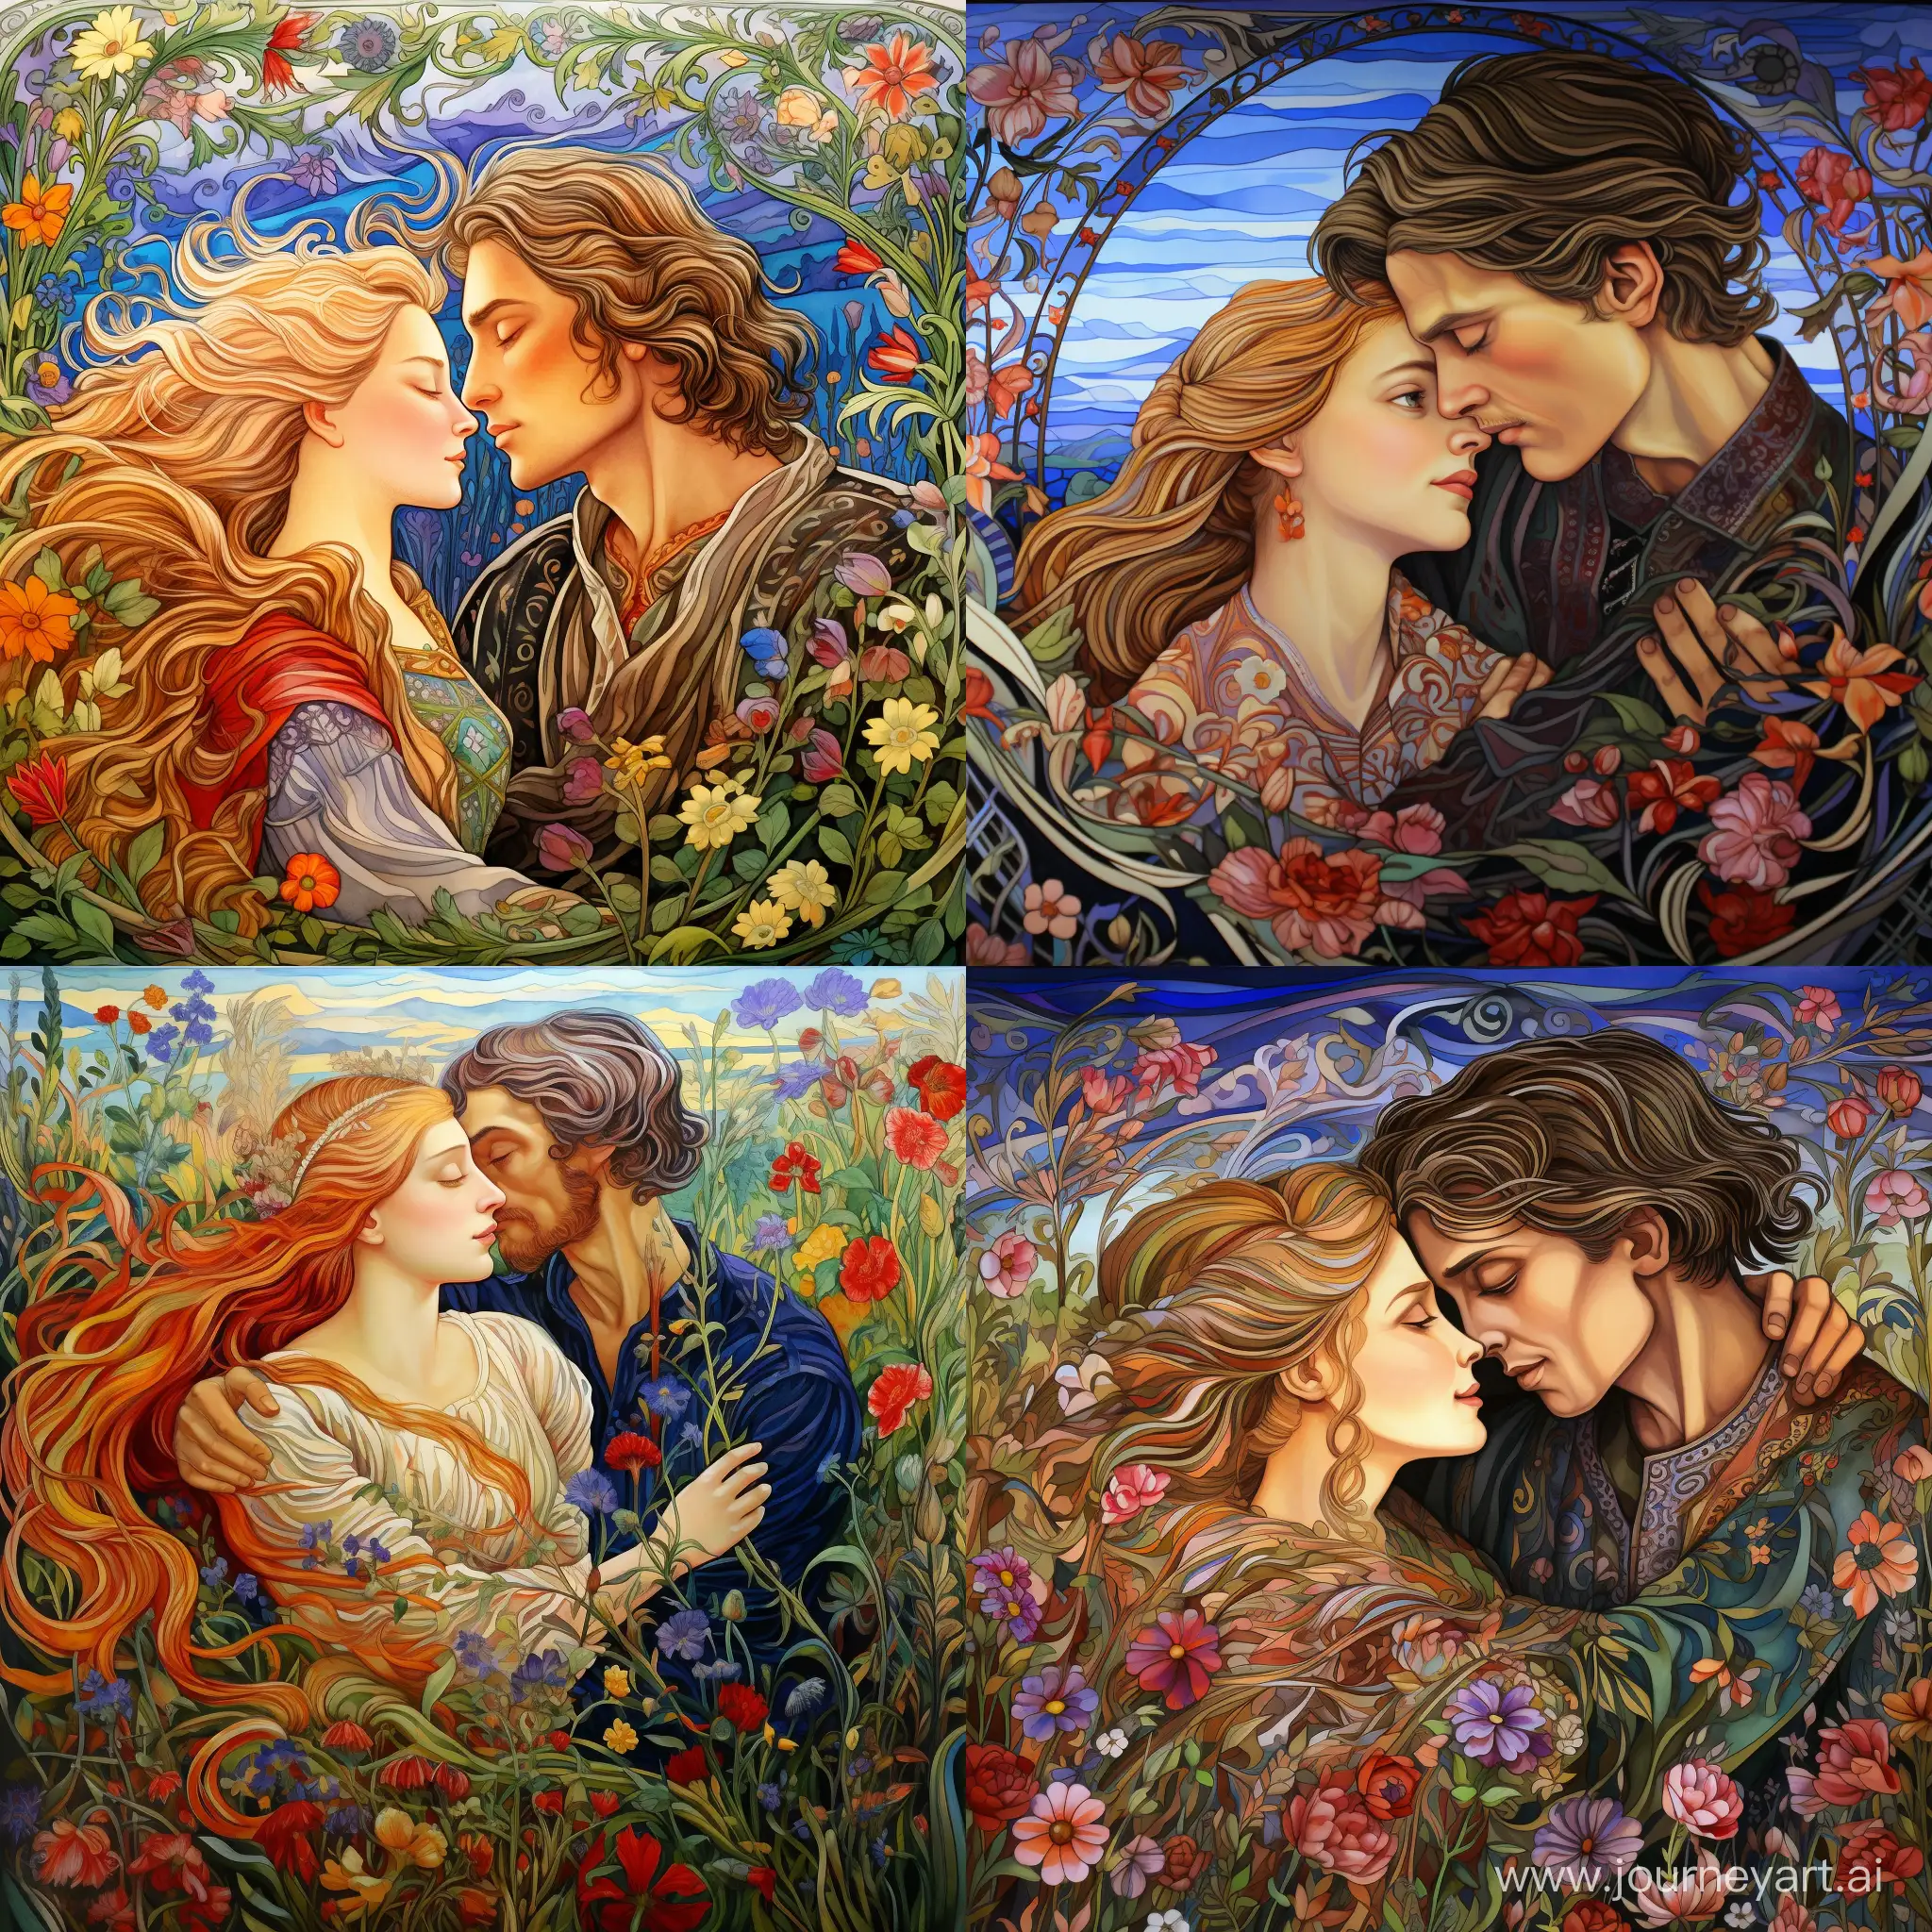 Russian-Folklore-Love-Whirlwind-Embrace-in-Vibrant-Colors